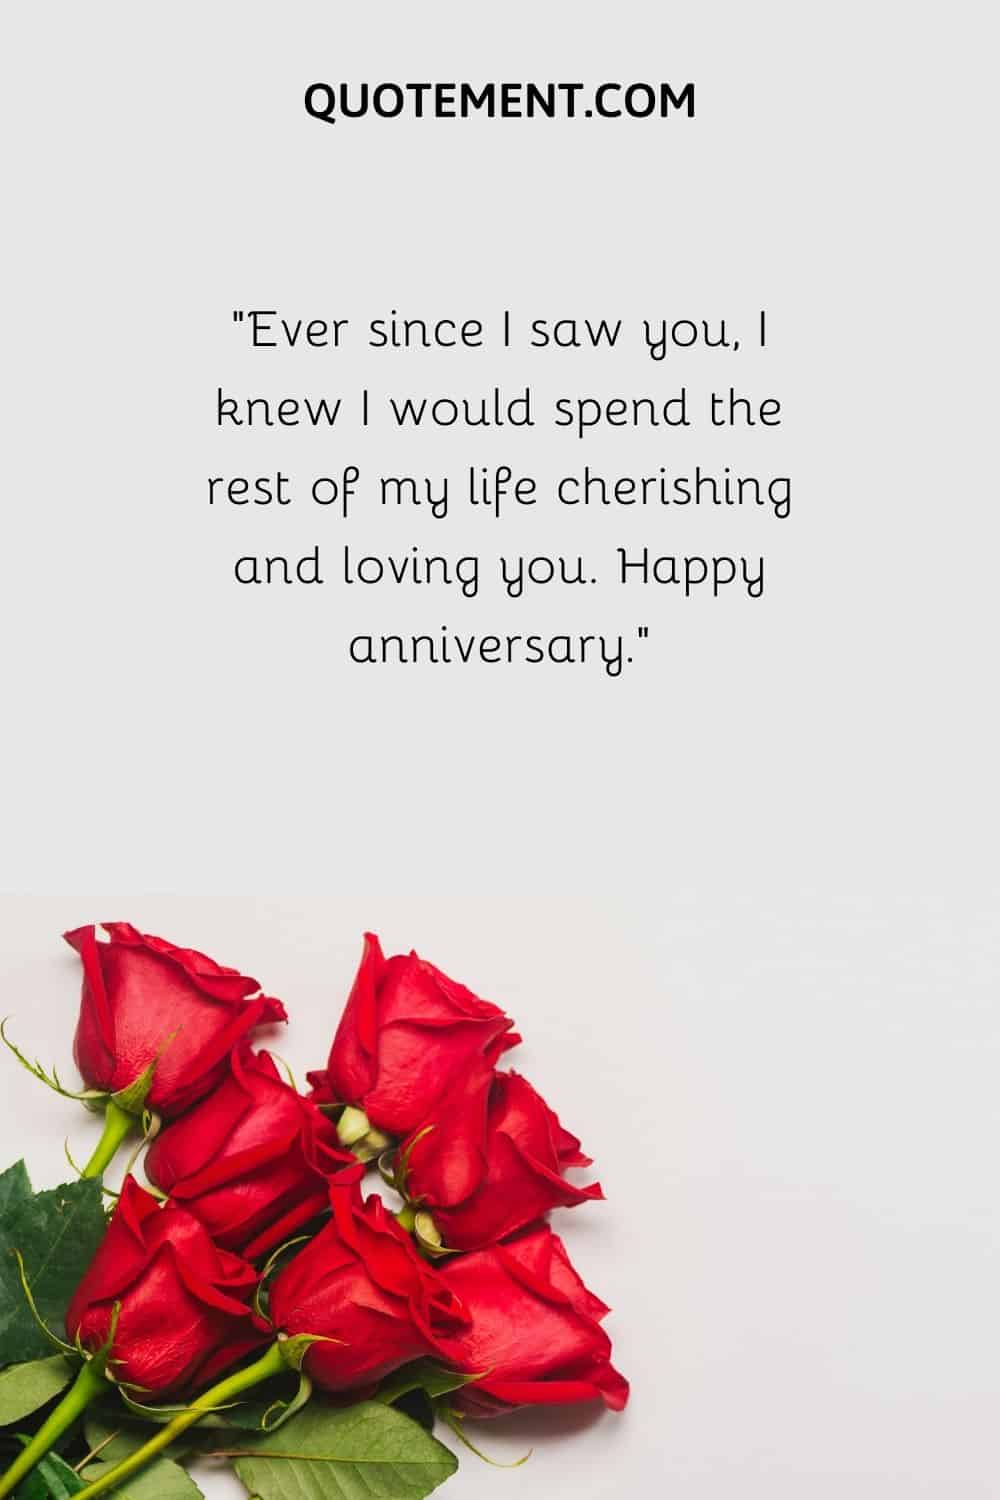 “Ever since I saw you, I knew I would spend the rest of my life cherishing and loving you. Happy anniversary.”